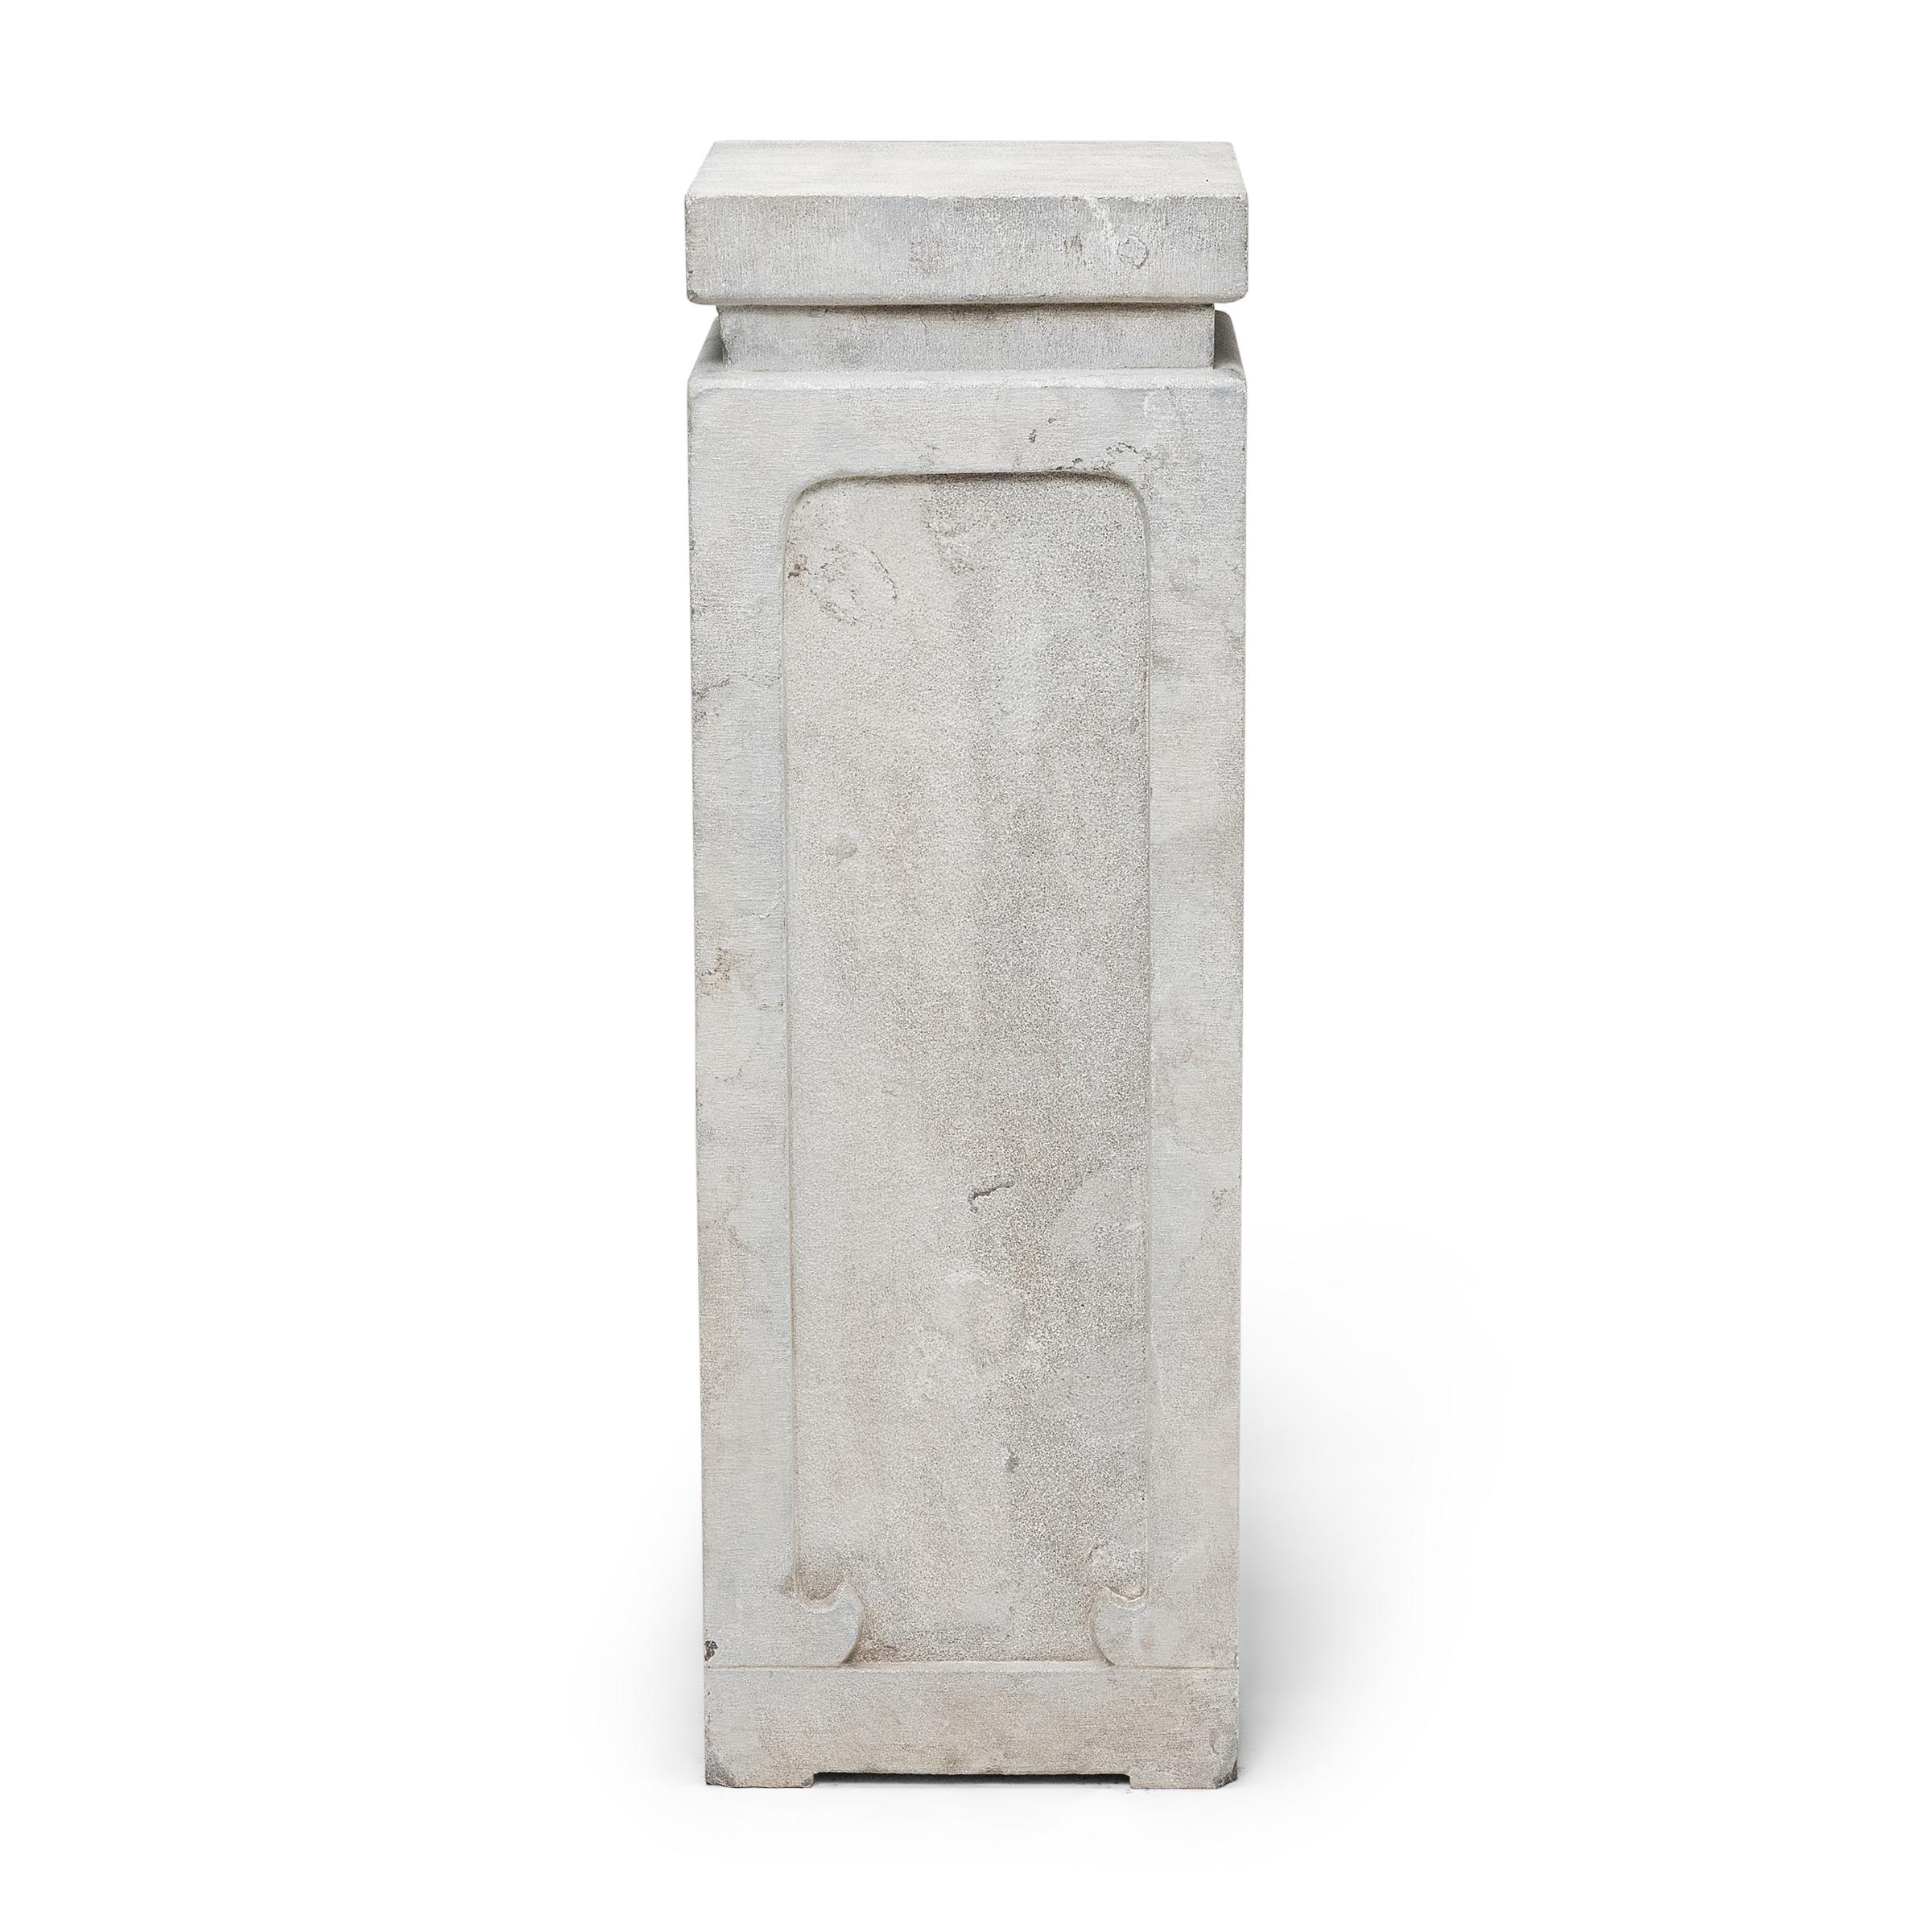 This minimalist stone pedestal exemplifies the quiet refinement and simplicity that defined Ming-dynasty stone furniture. Hand-carved of solid limestone by artisans in Shanxi province, the pedestal resembles a high tea table or incense stand,